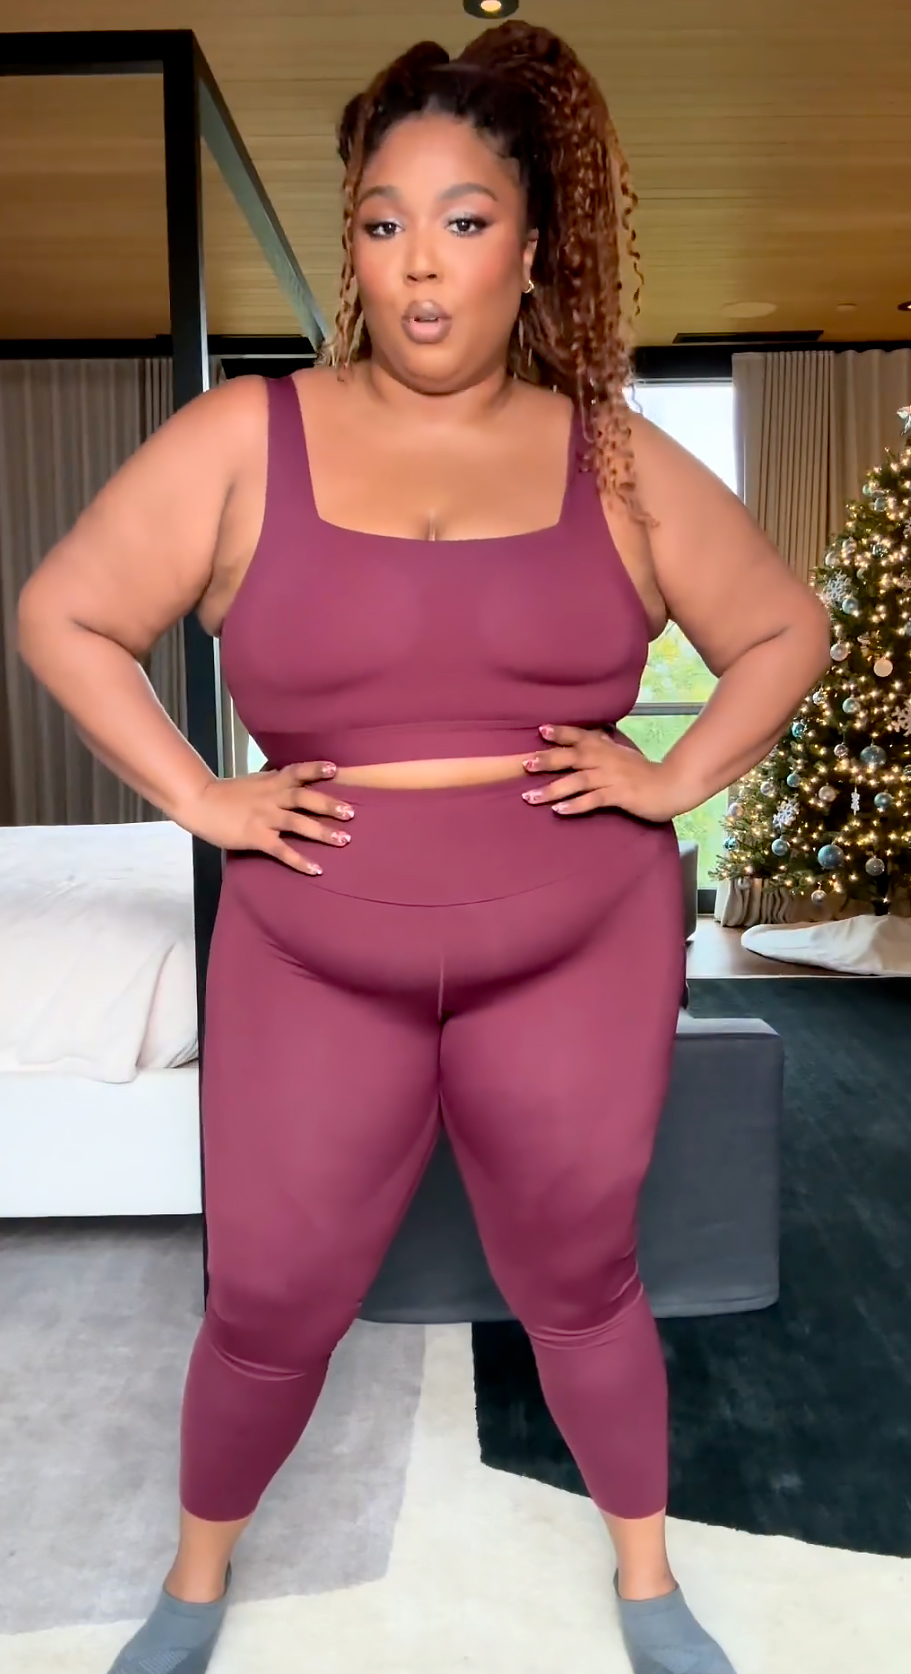 Lizzo Looks Snatched in Bra and Leggings From Yitty: 'New Me